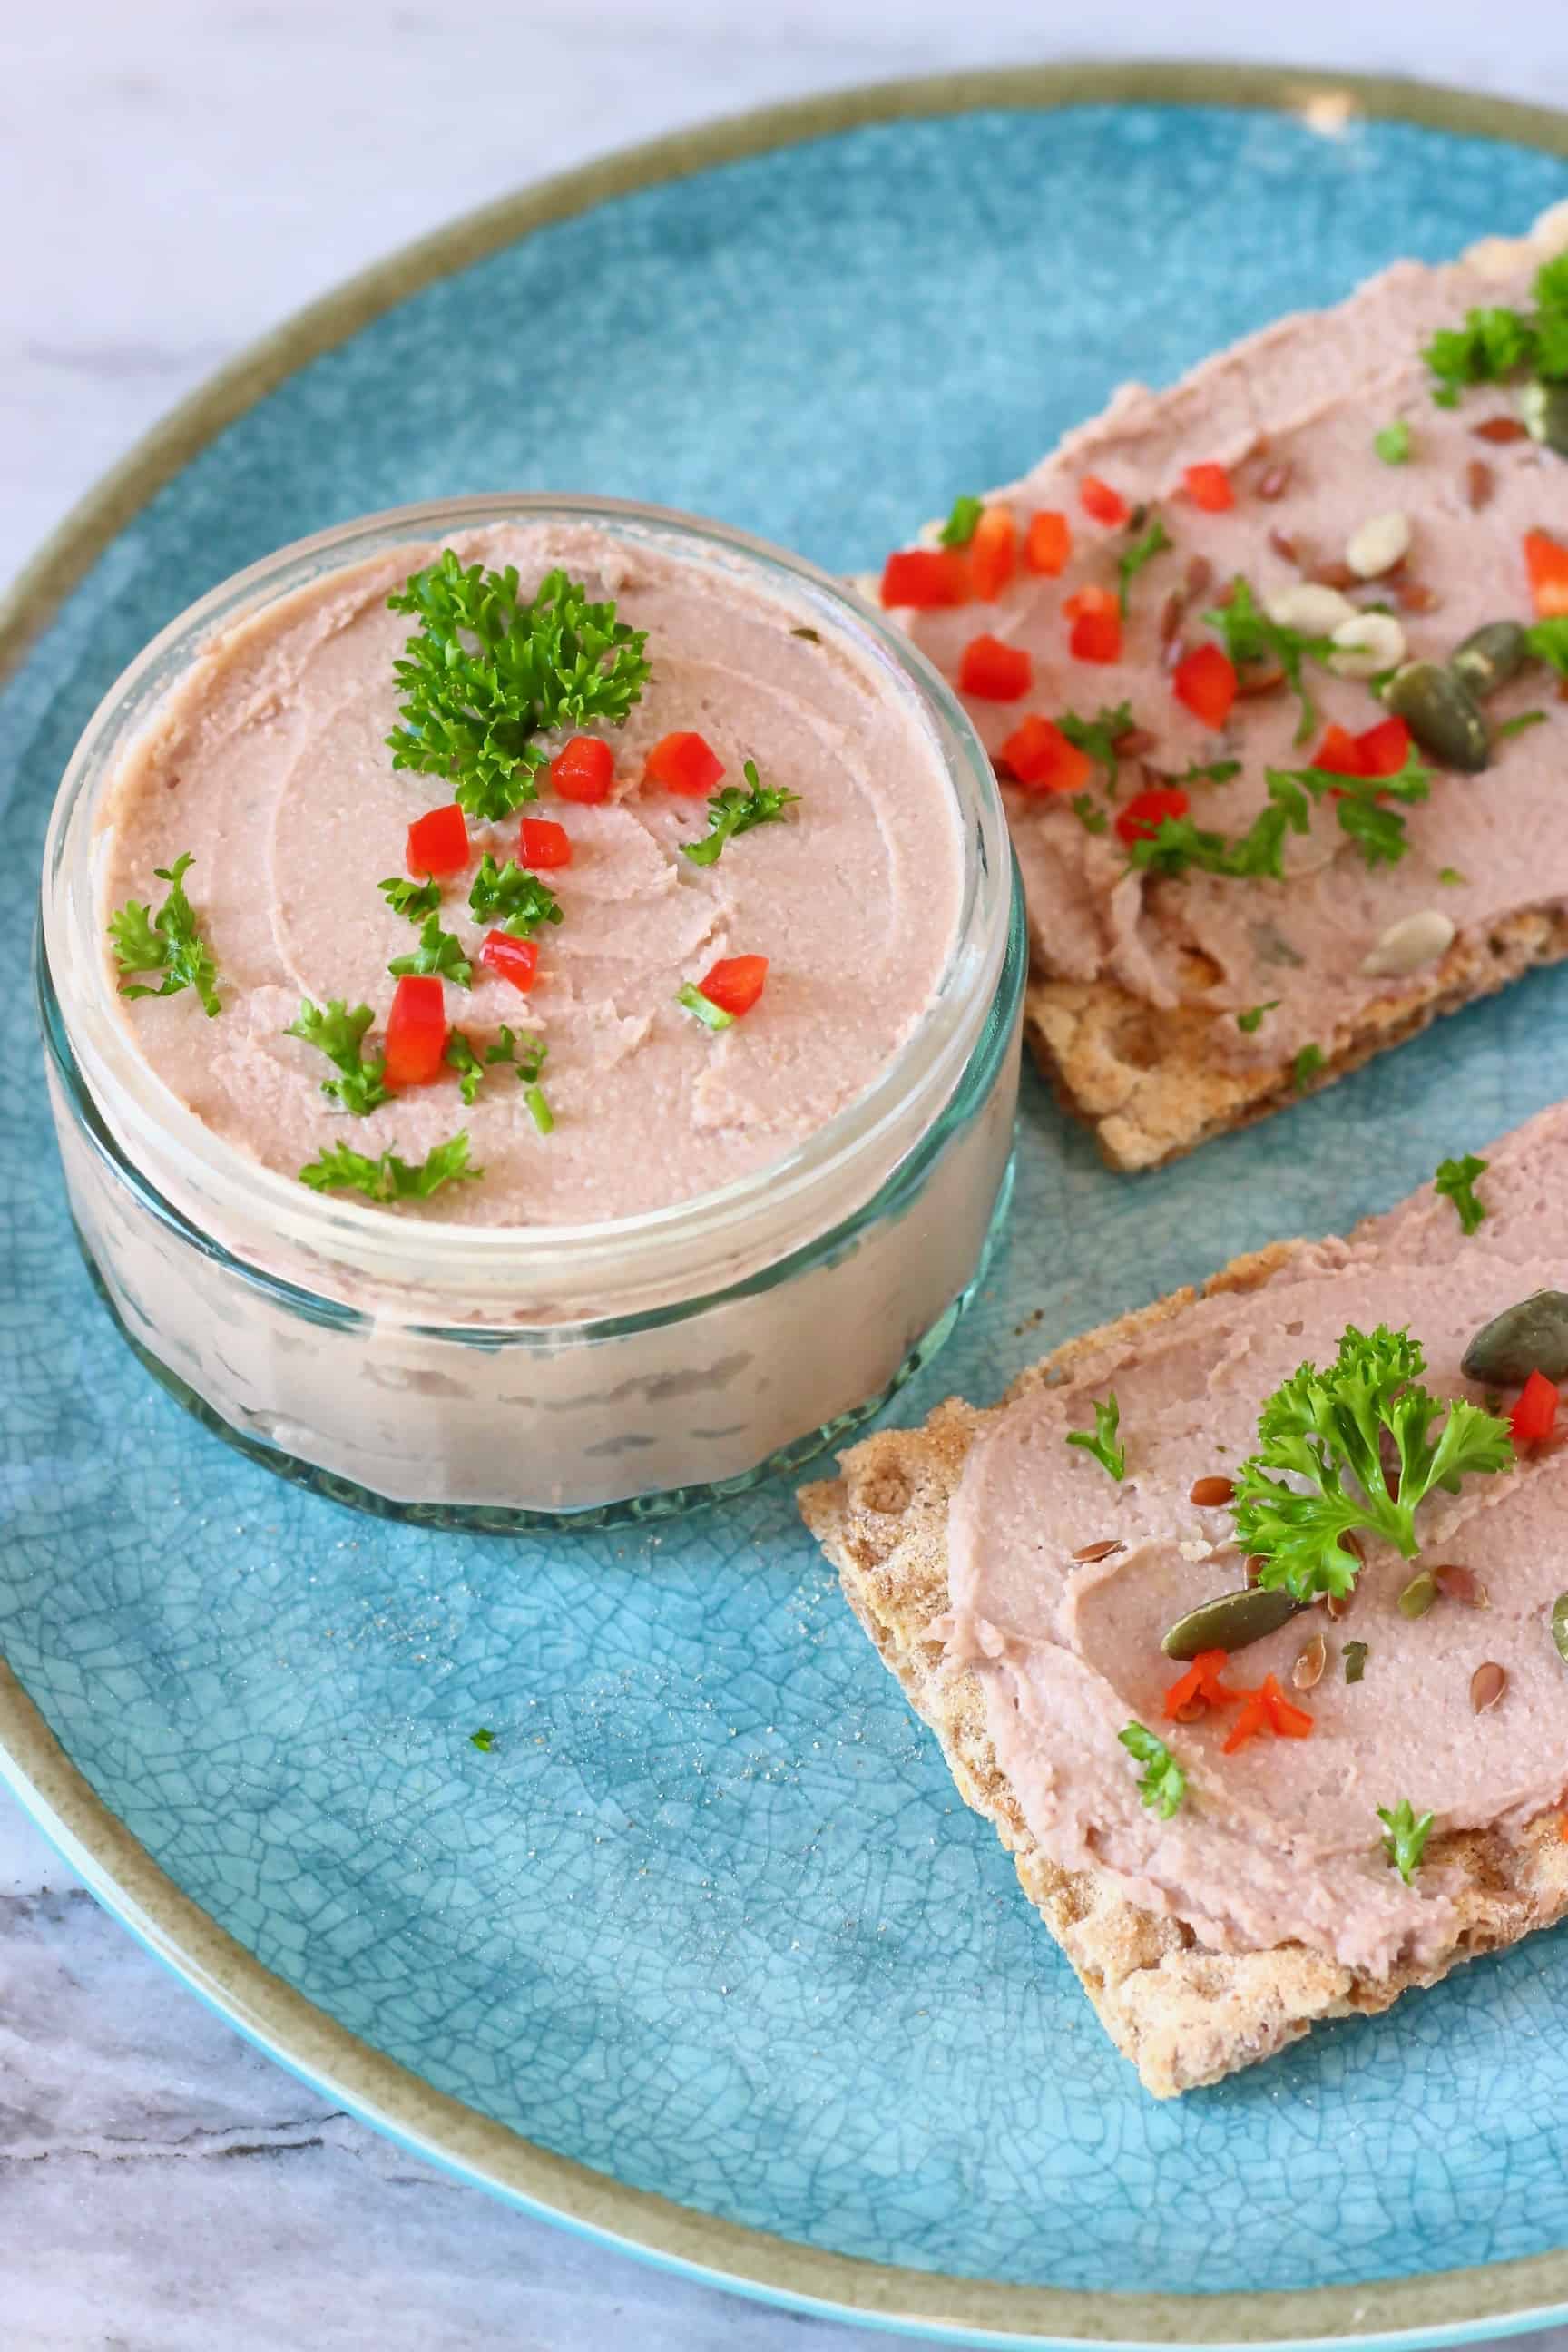 A glass pot filled with beige pâté topped with herbs and chopped red pepper on a blue plate with two rectangular crackers spread with pâté and decorated with pumpkin seeds, chopped red chilli and green herbs